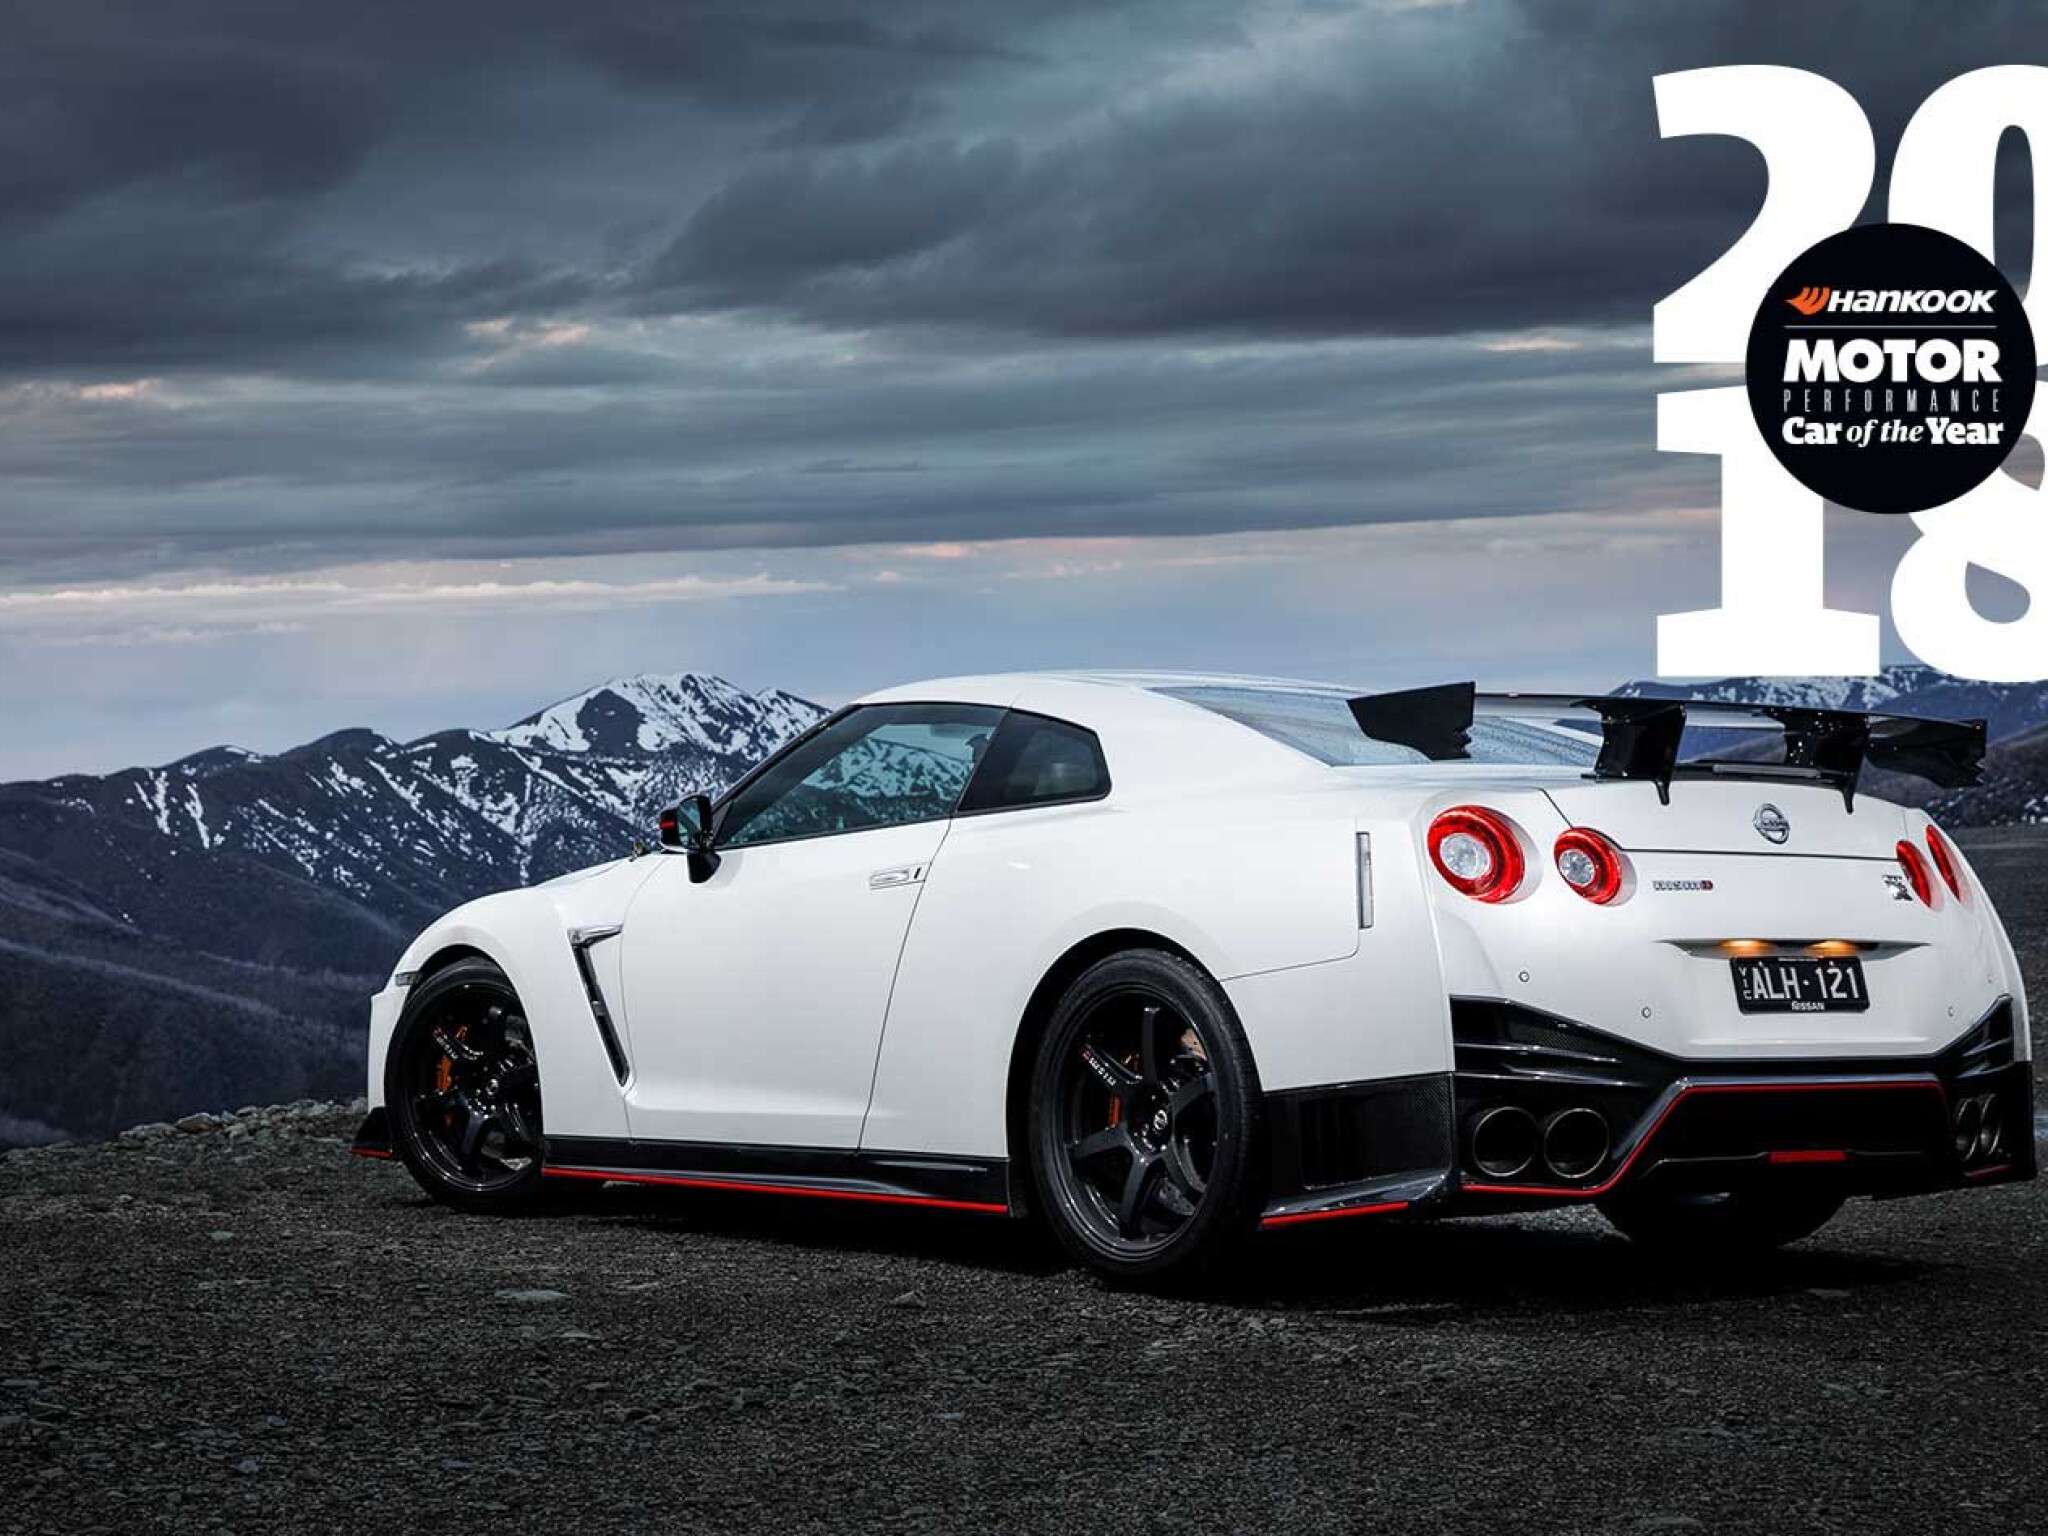 Nissan GT-R Nismo: Performance Car of the Year 2018 4th Place